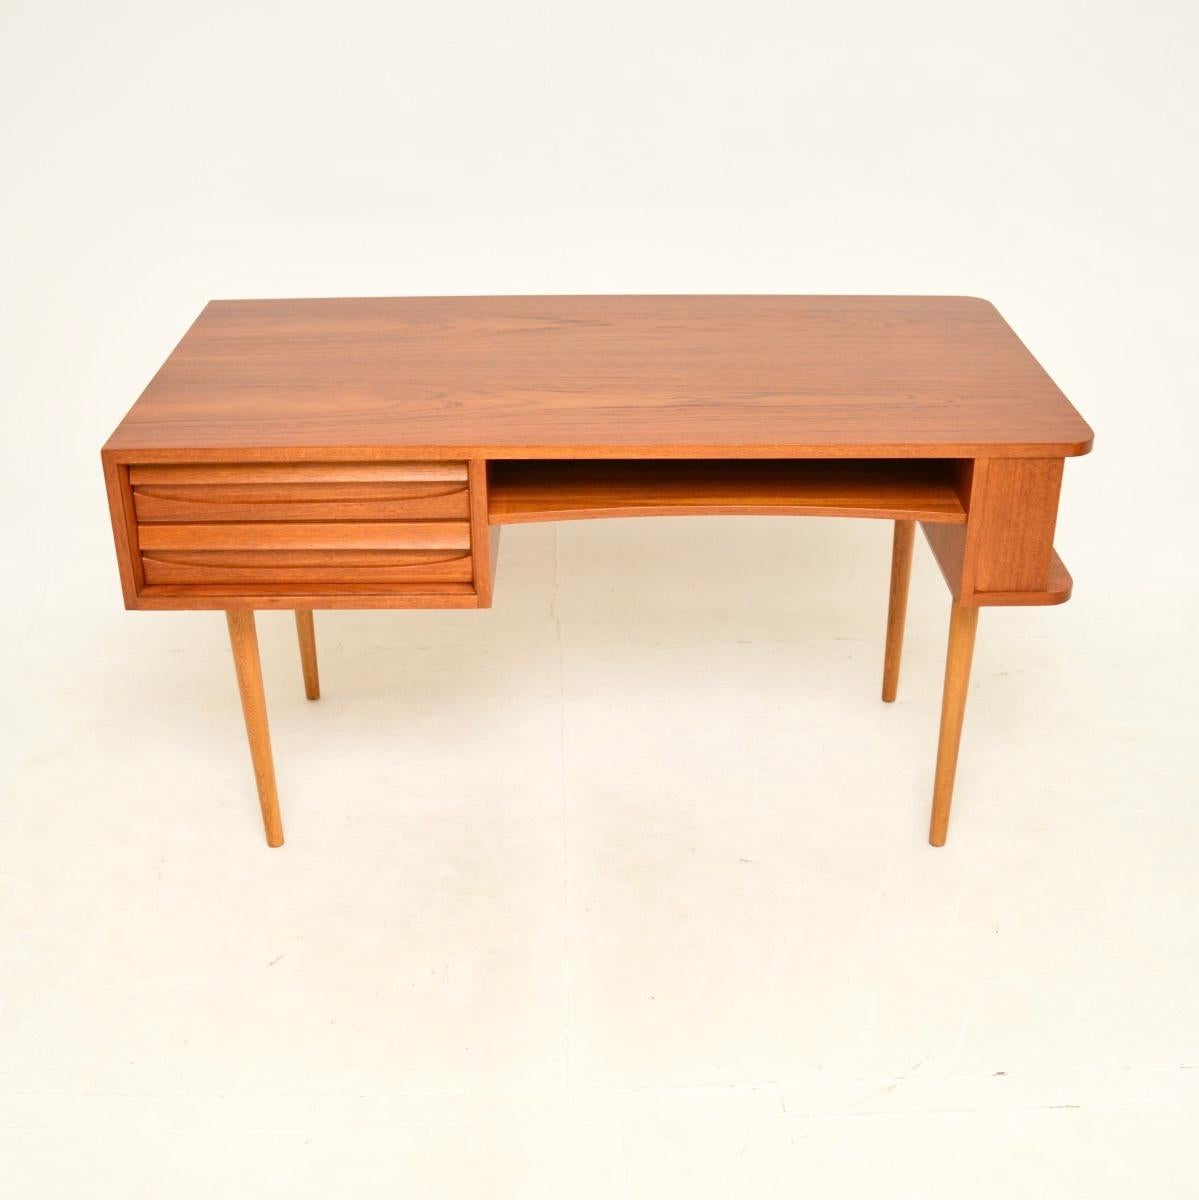 A very stylish and extremely well made vintage Swedish teak desk. This was recently imported from Sweden, it dates from the 1960’s.

The quality is outstanding, this has an interesting and useful design. It stands on a solid oak base with